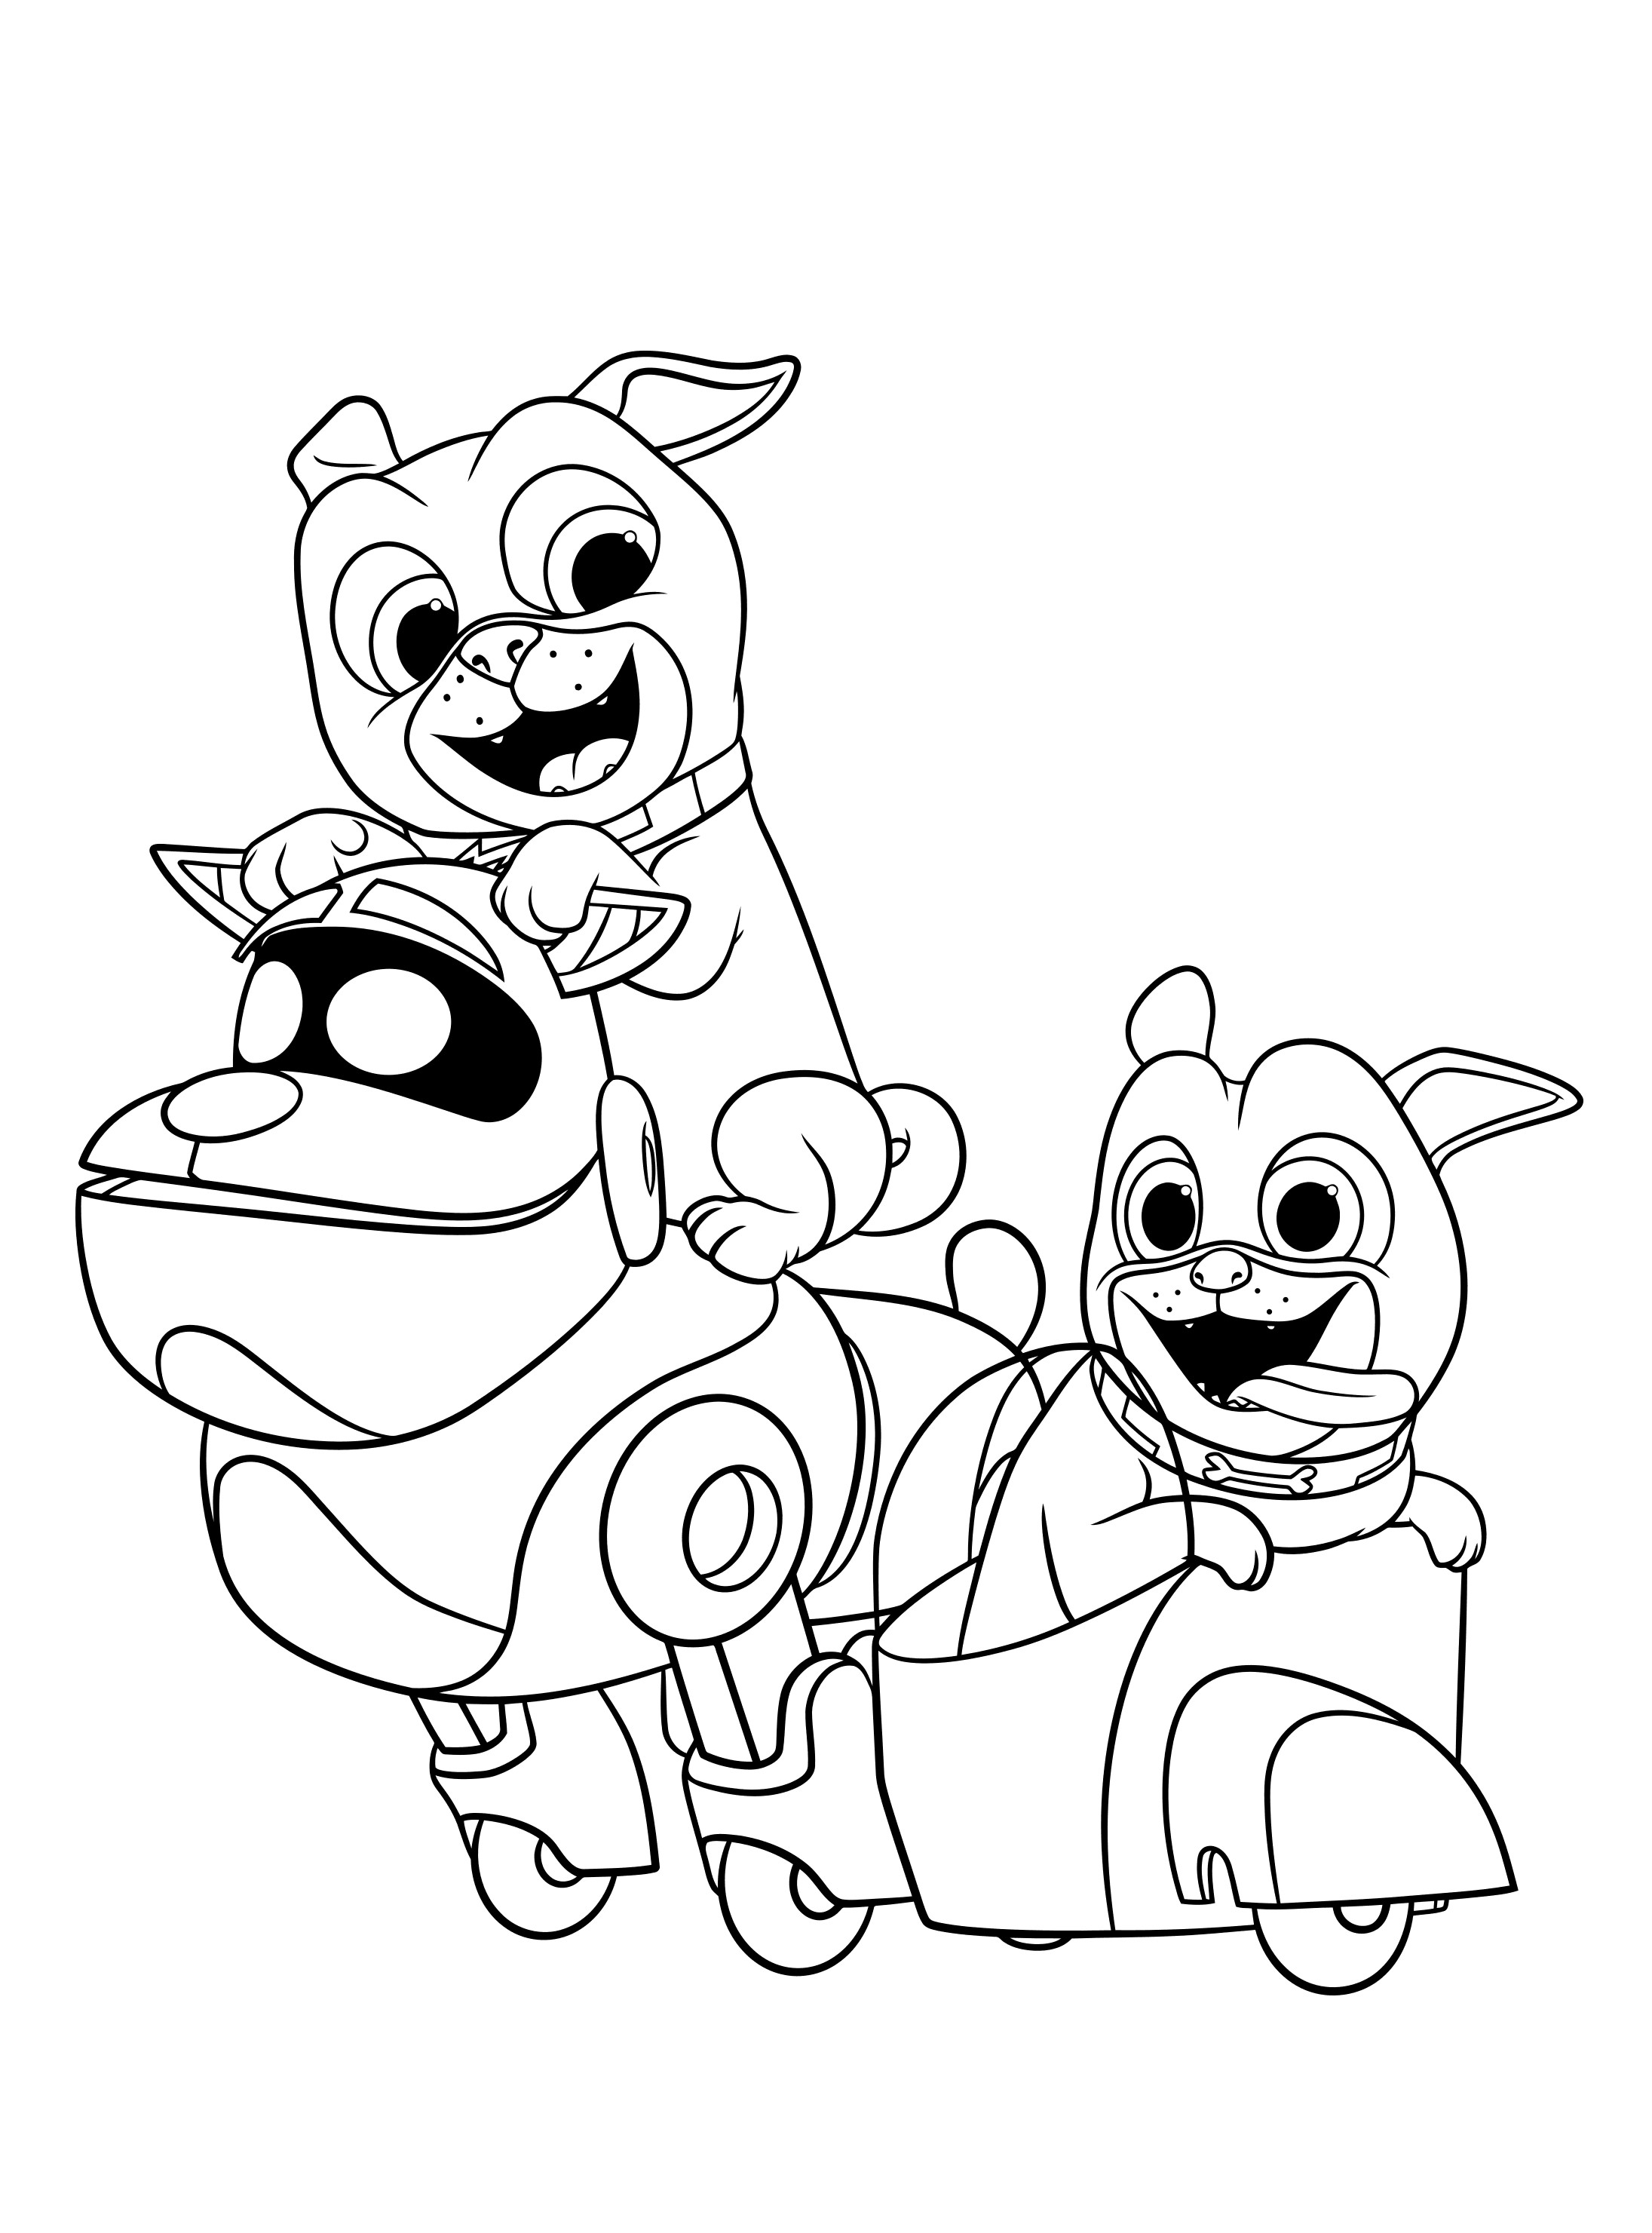 Puppy Dog Pals coloring pages to download and print for free